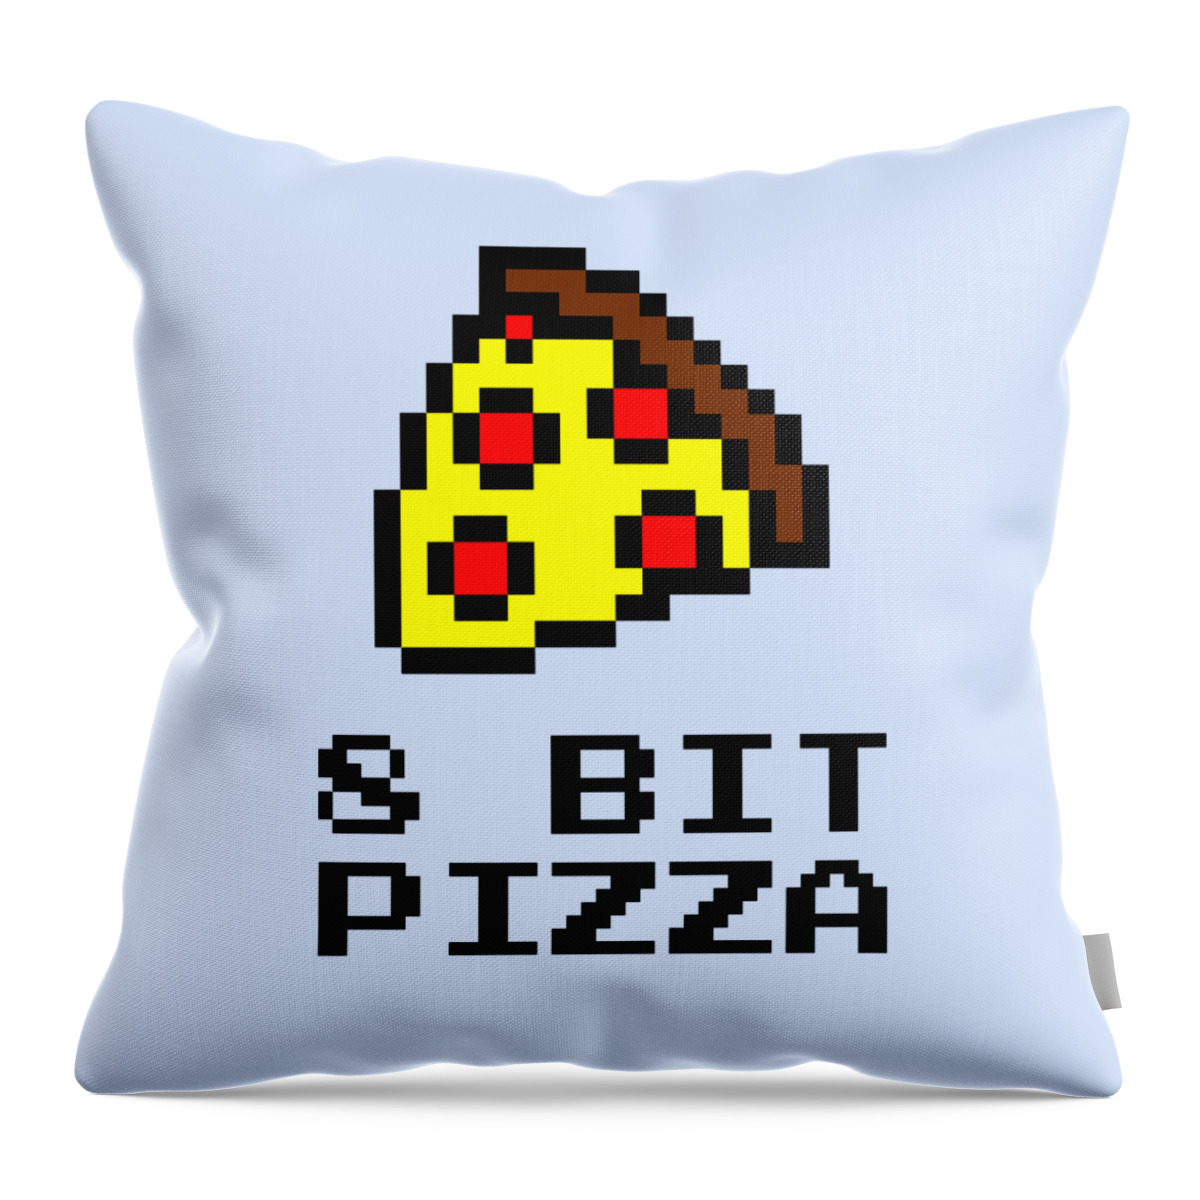 Pizza Throw Pillow featuring the digital art 8 Bit Pizza Computer Humor by Matthias Hauser